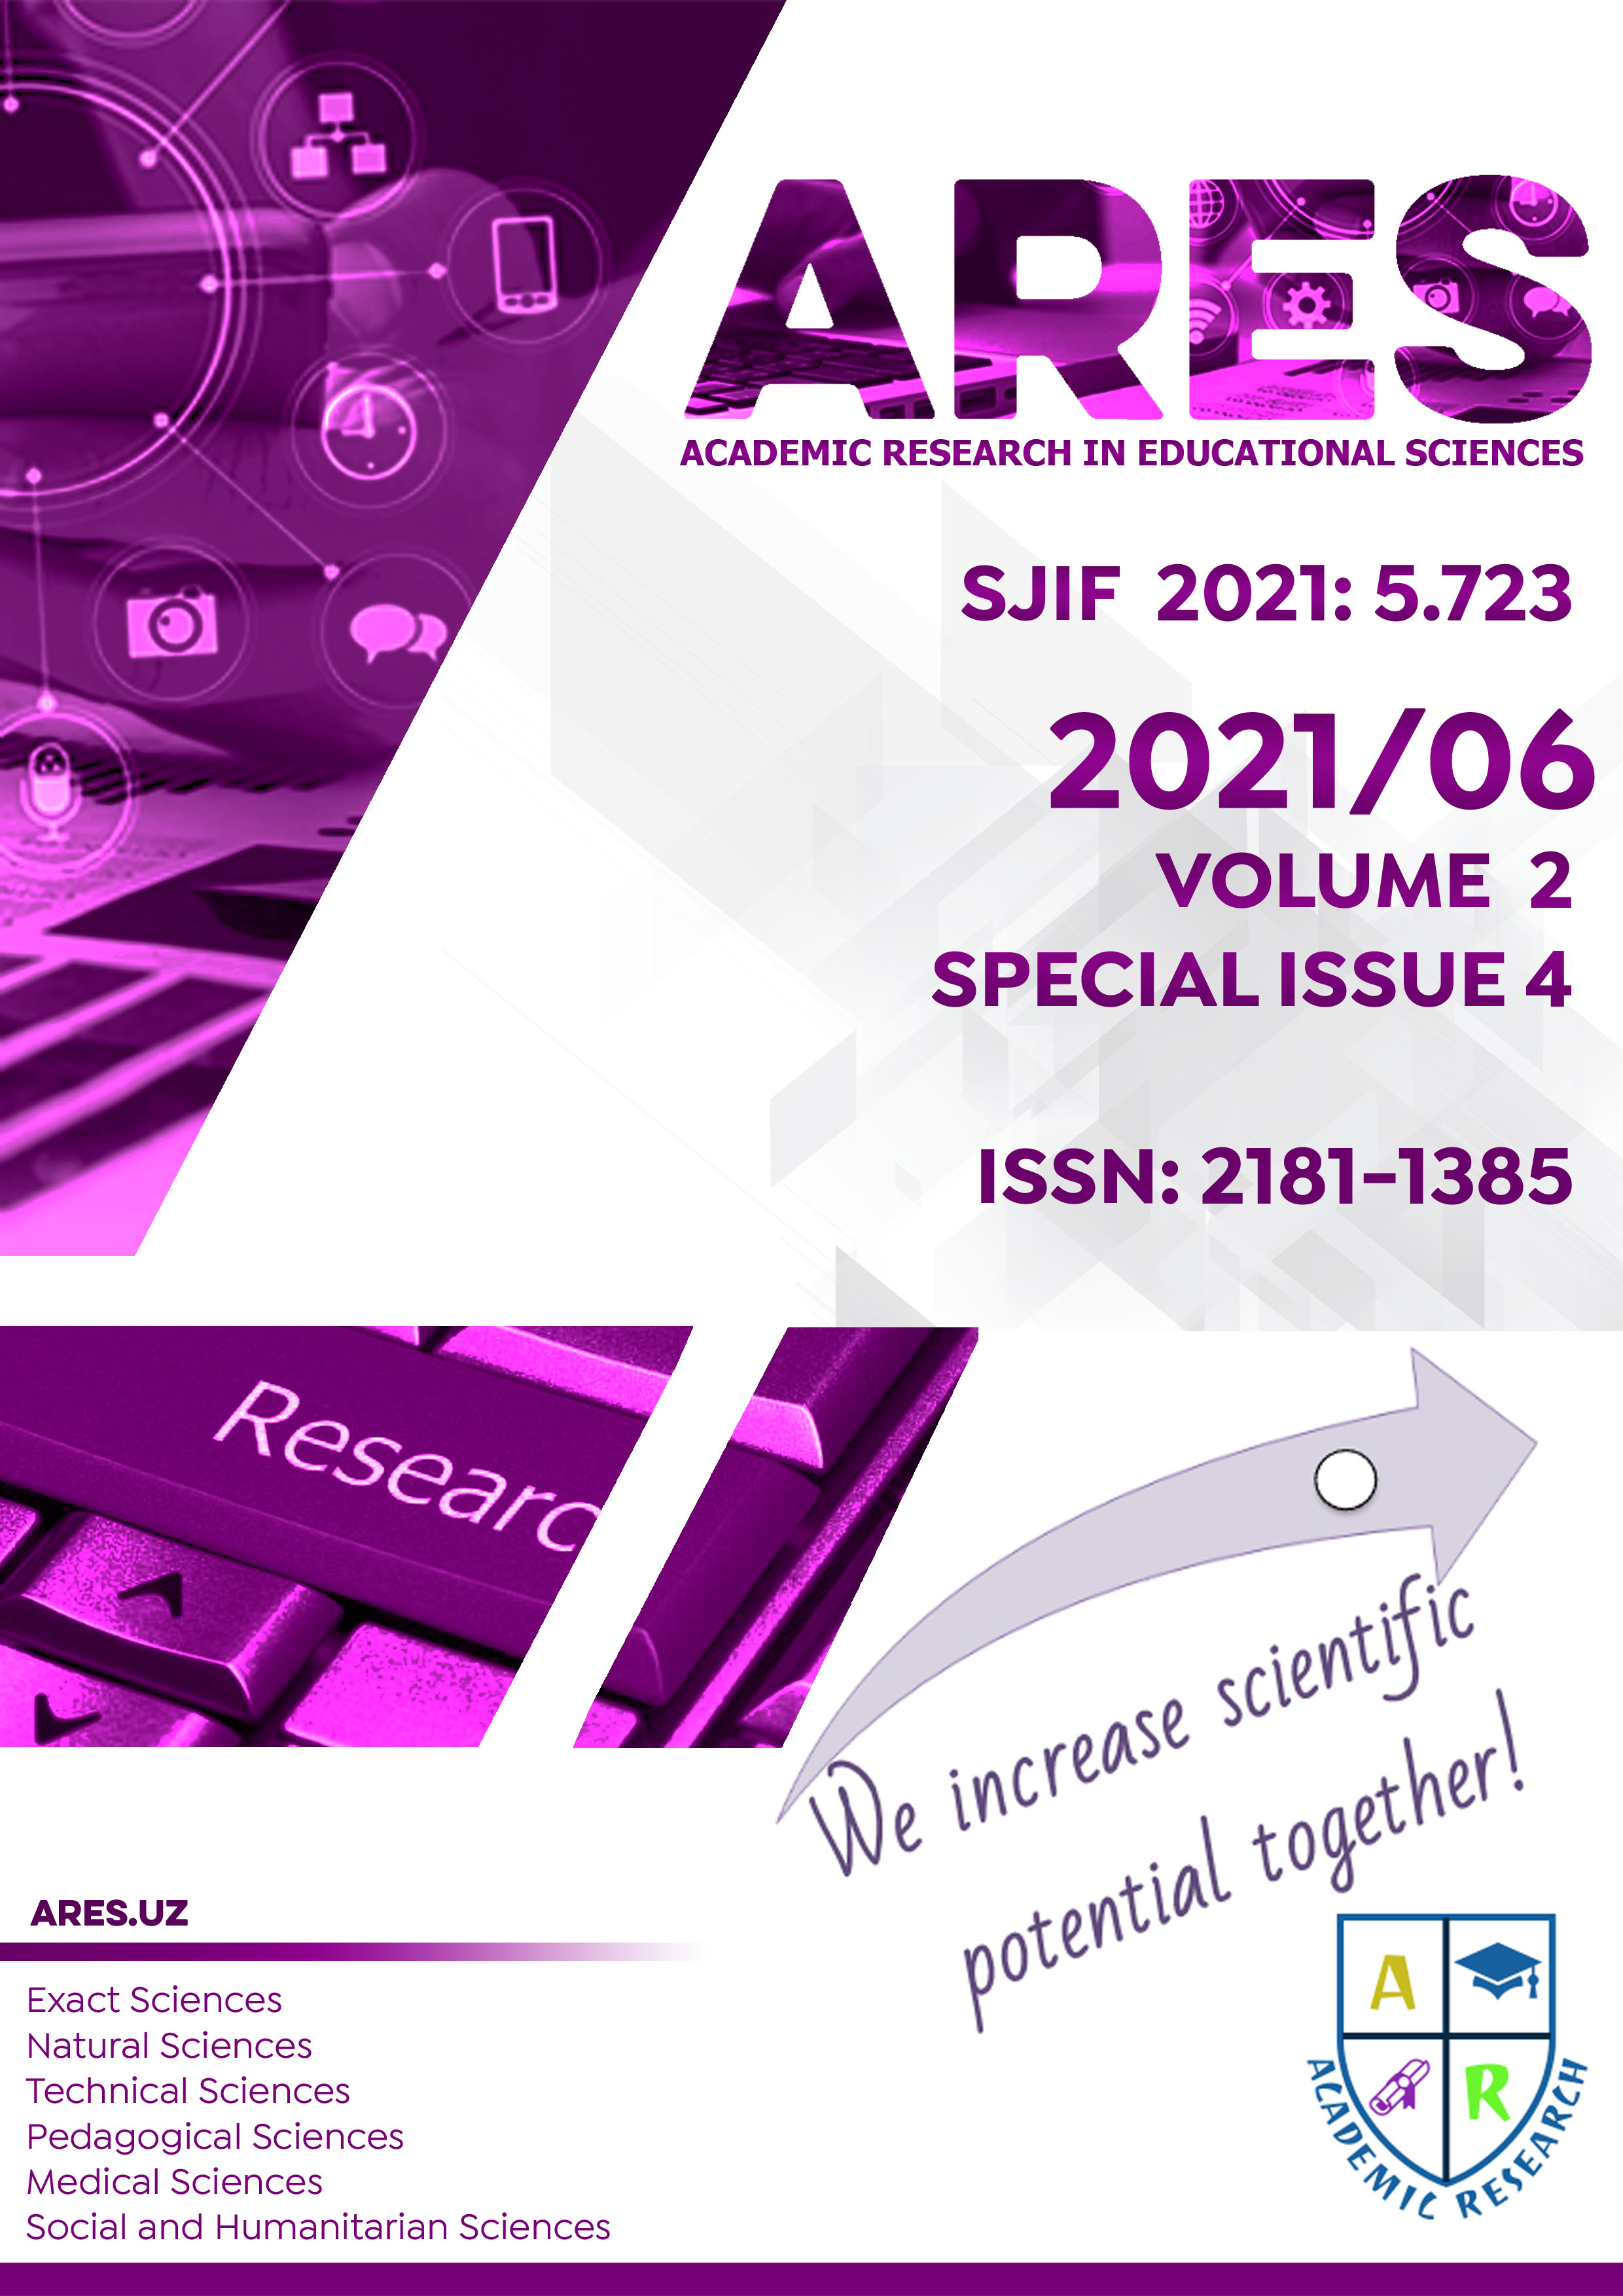 ARES Vol. 2 Special Issue 4, 2021